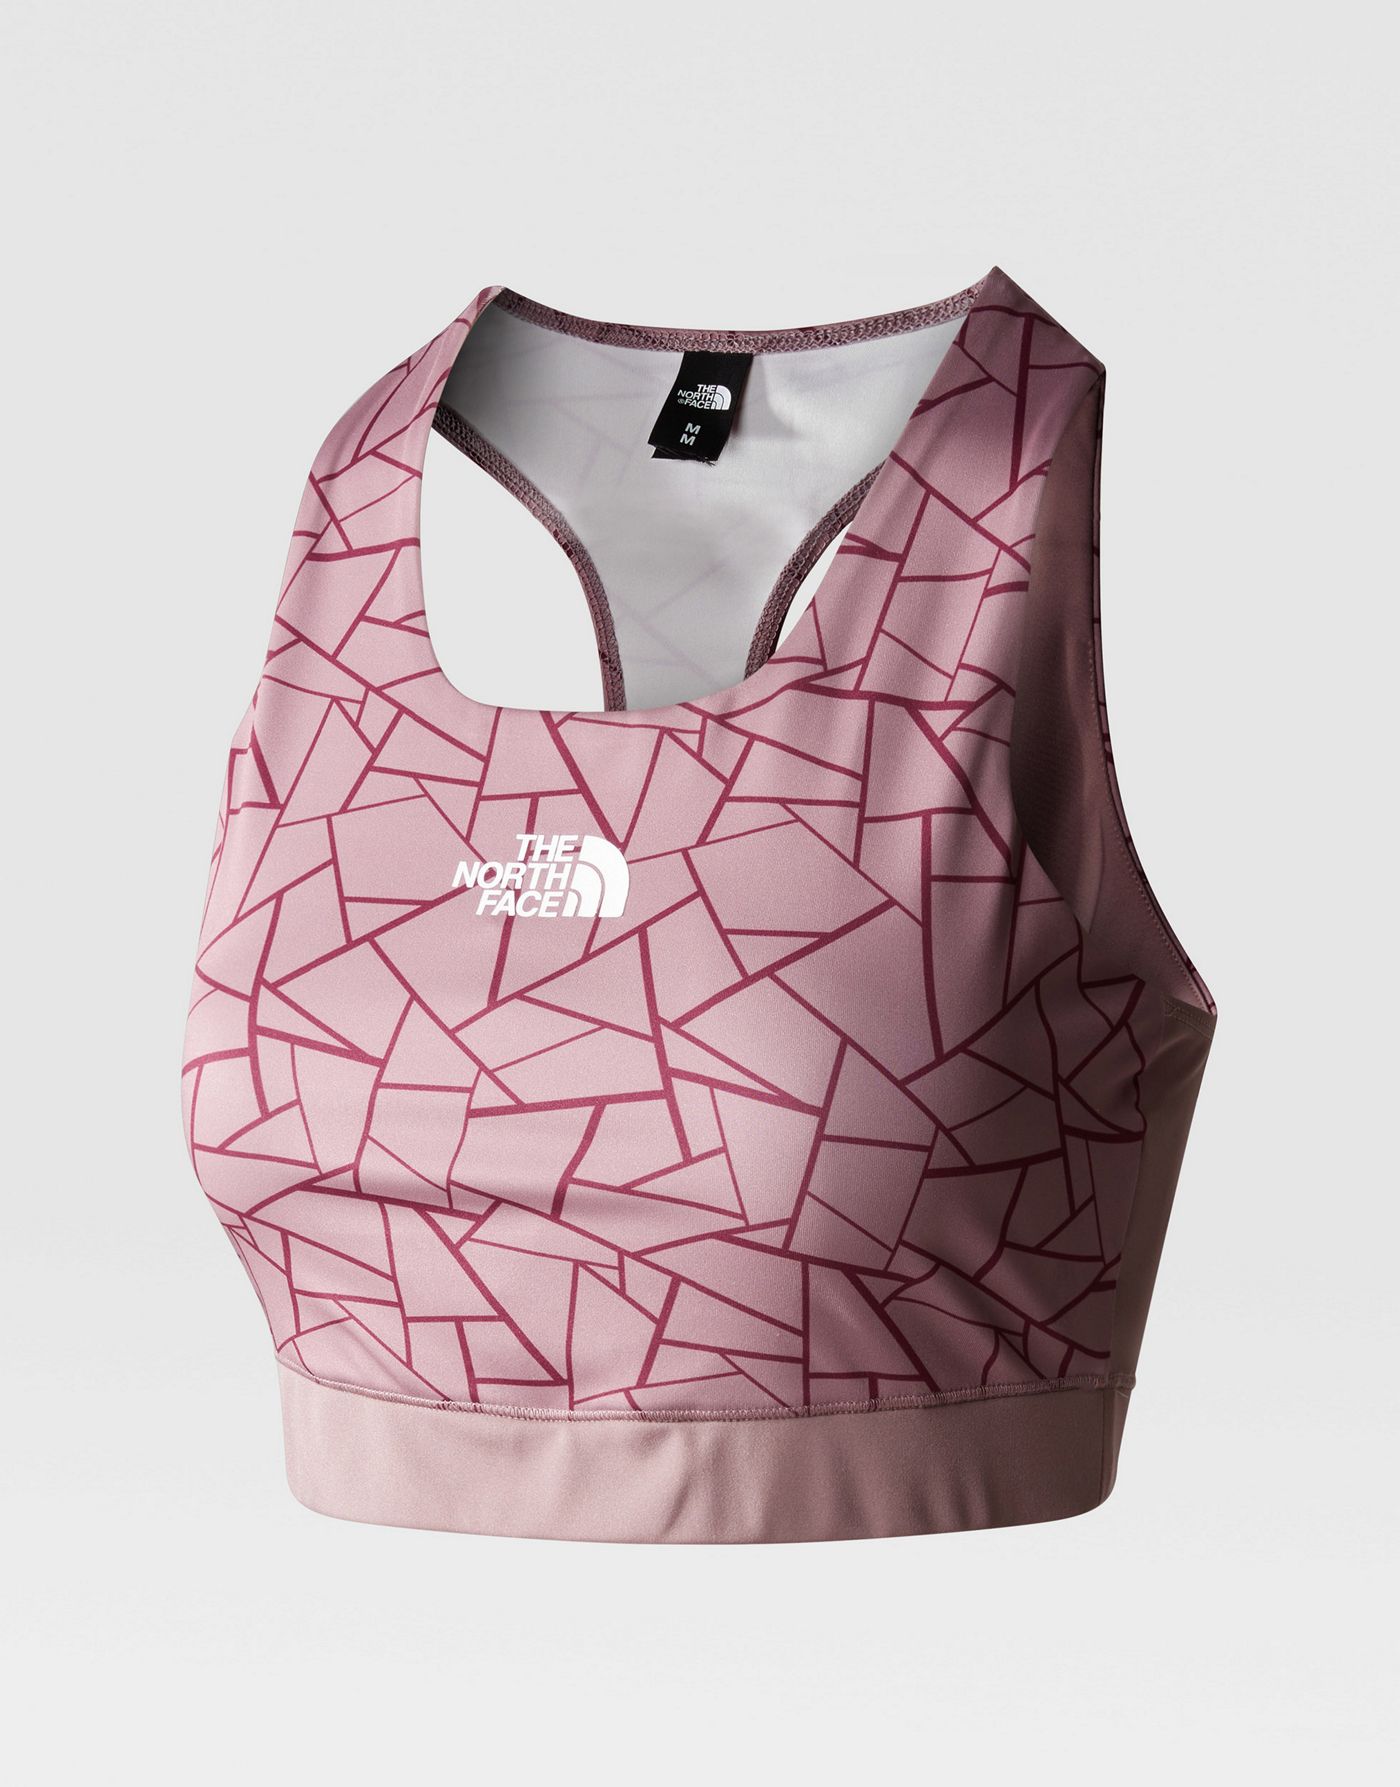 The North Face Mountain athletics lab tanklette in fawn grey tnf tangram